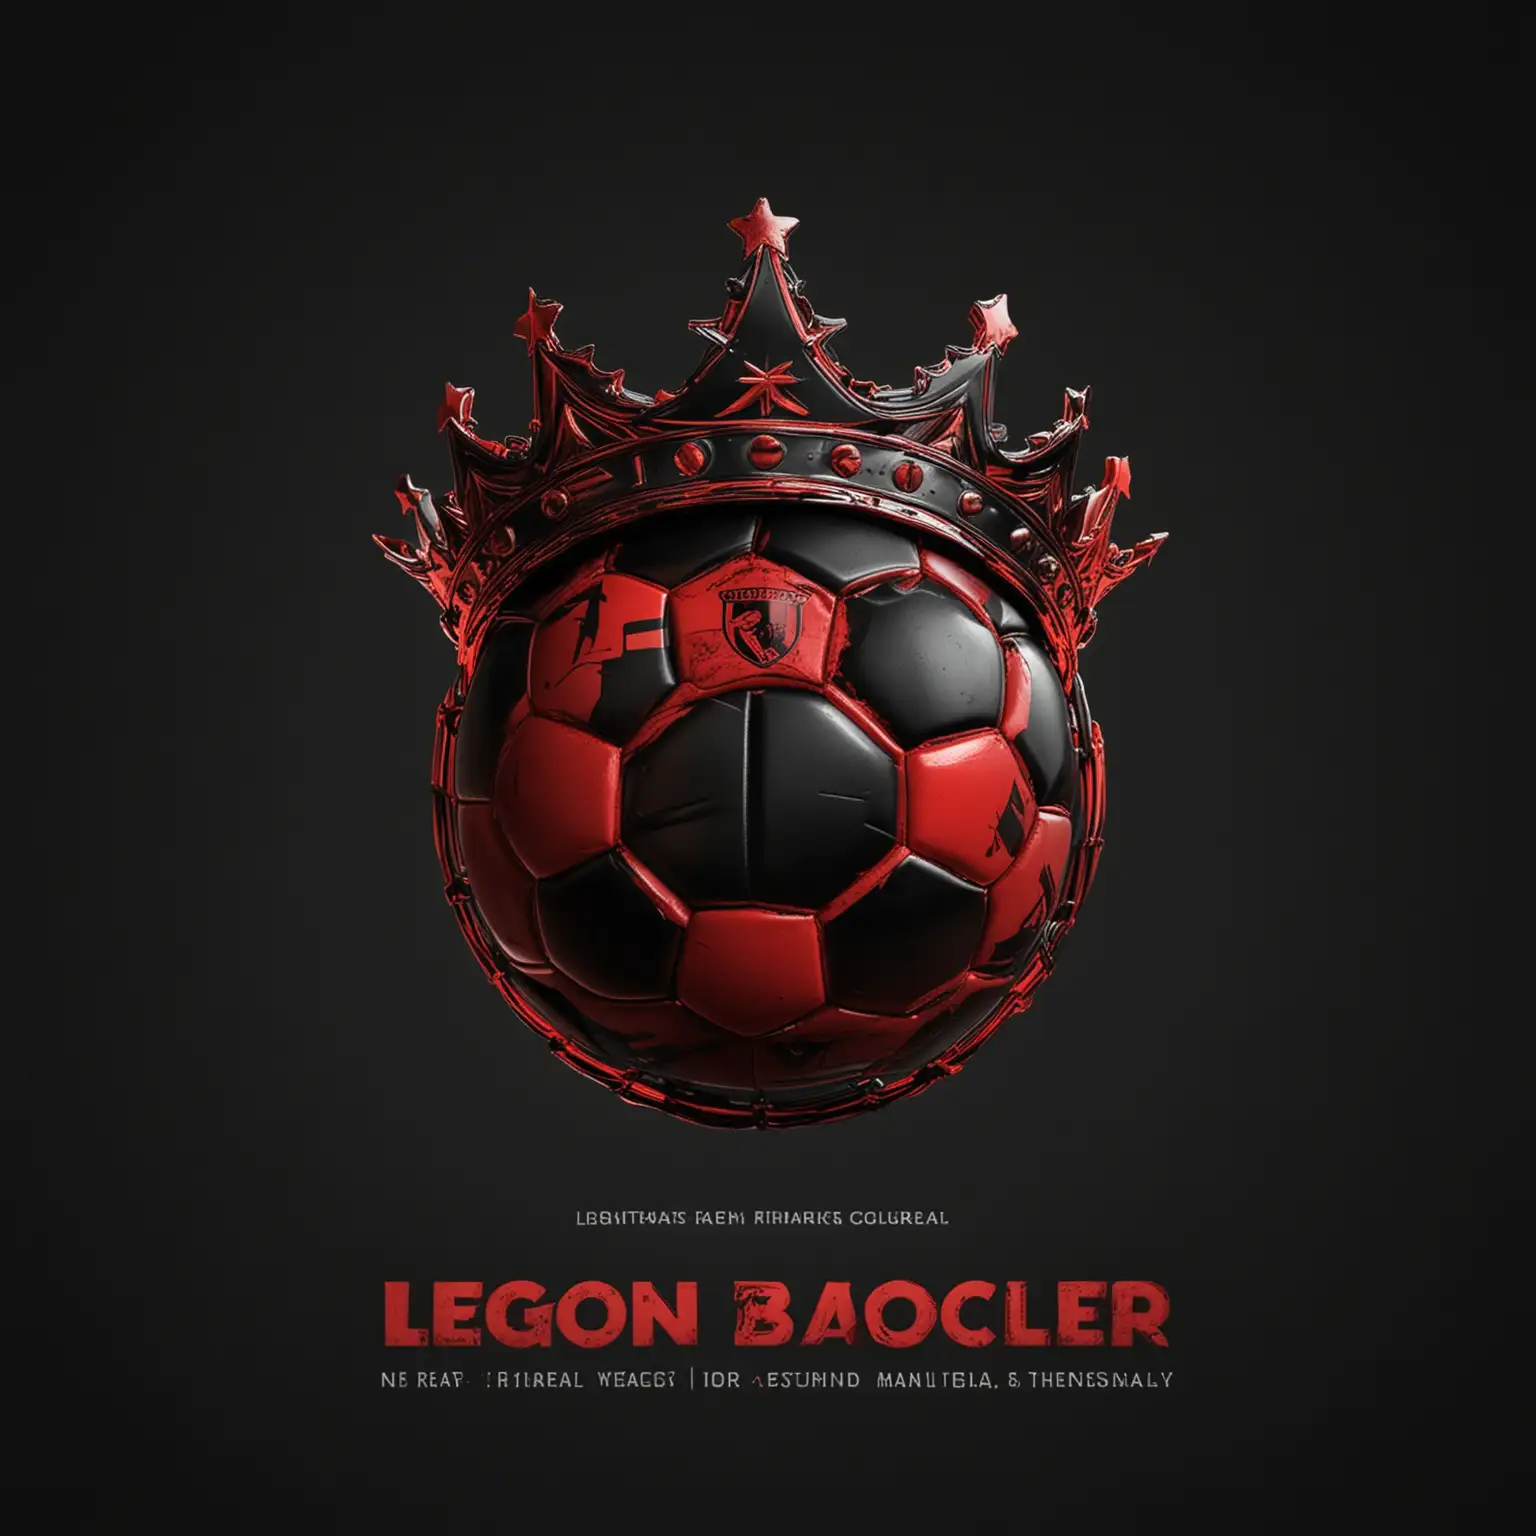 Make a logo only using red and black colors, the image has to have 1 red and black colored soccer ball with a crown on it, with a black background, it has to say the following words"LEGION OF SOCCER", logo has to be clear and attention grabbing.